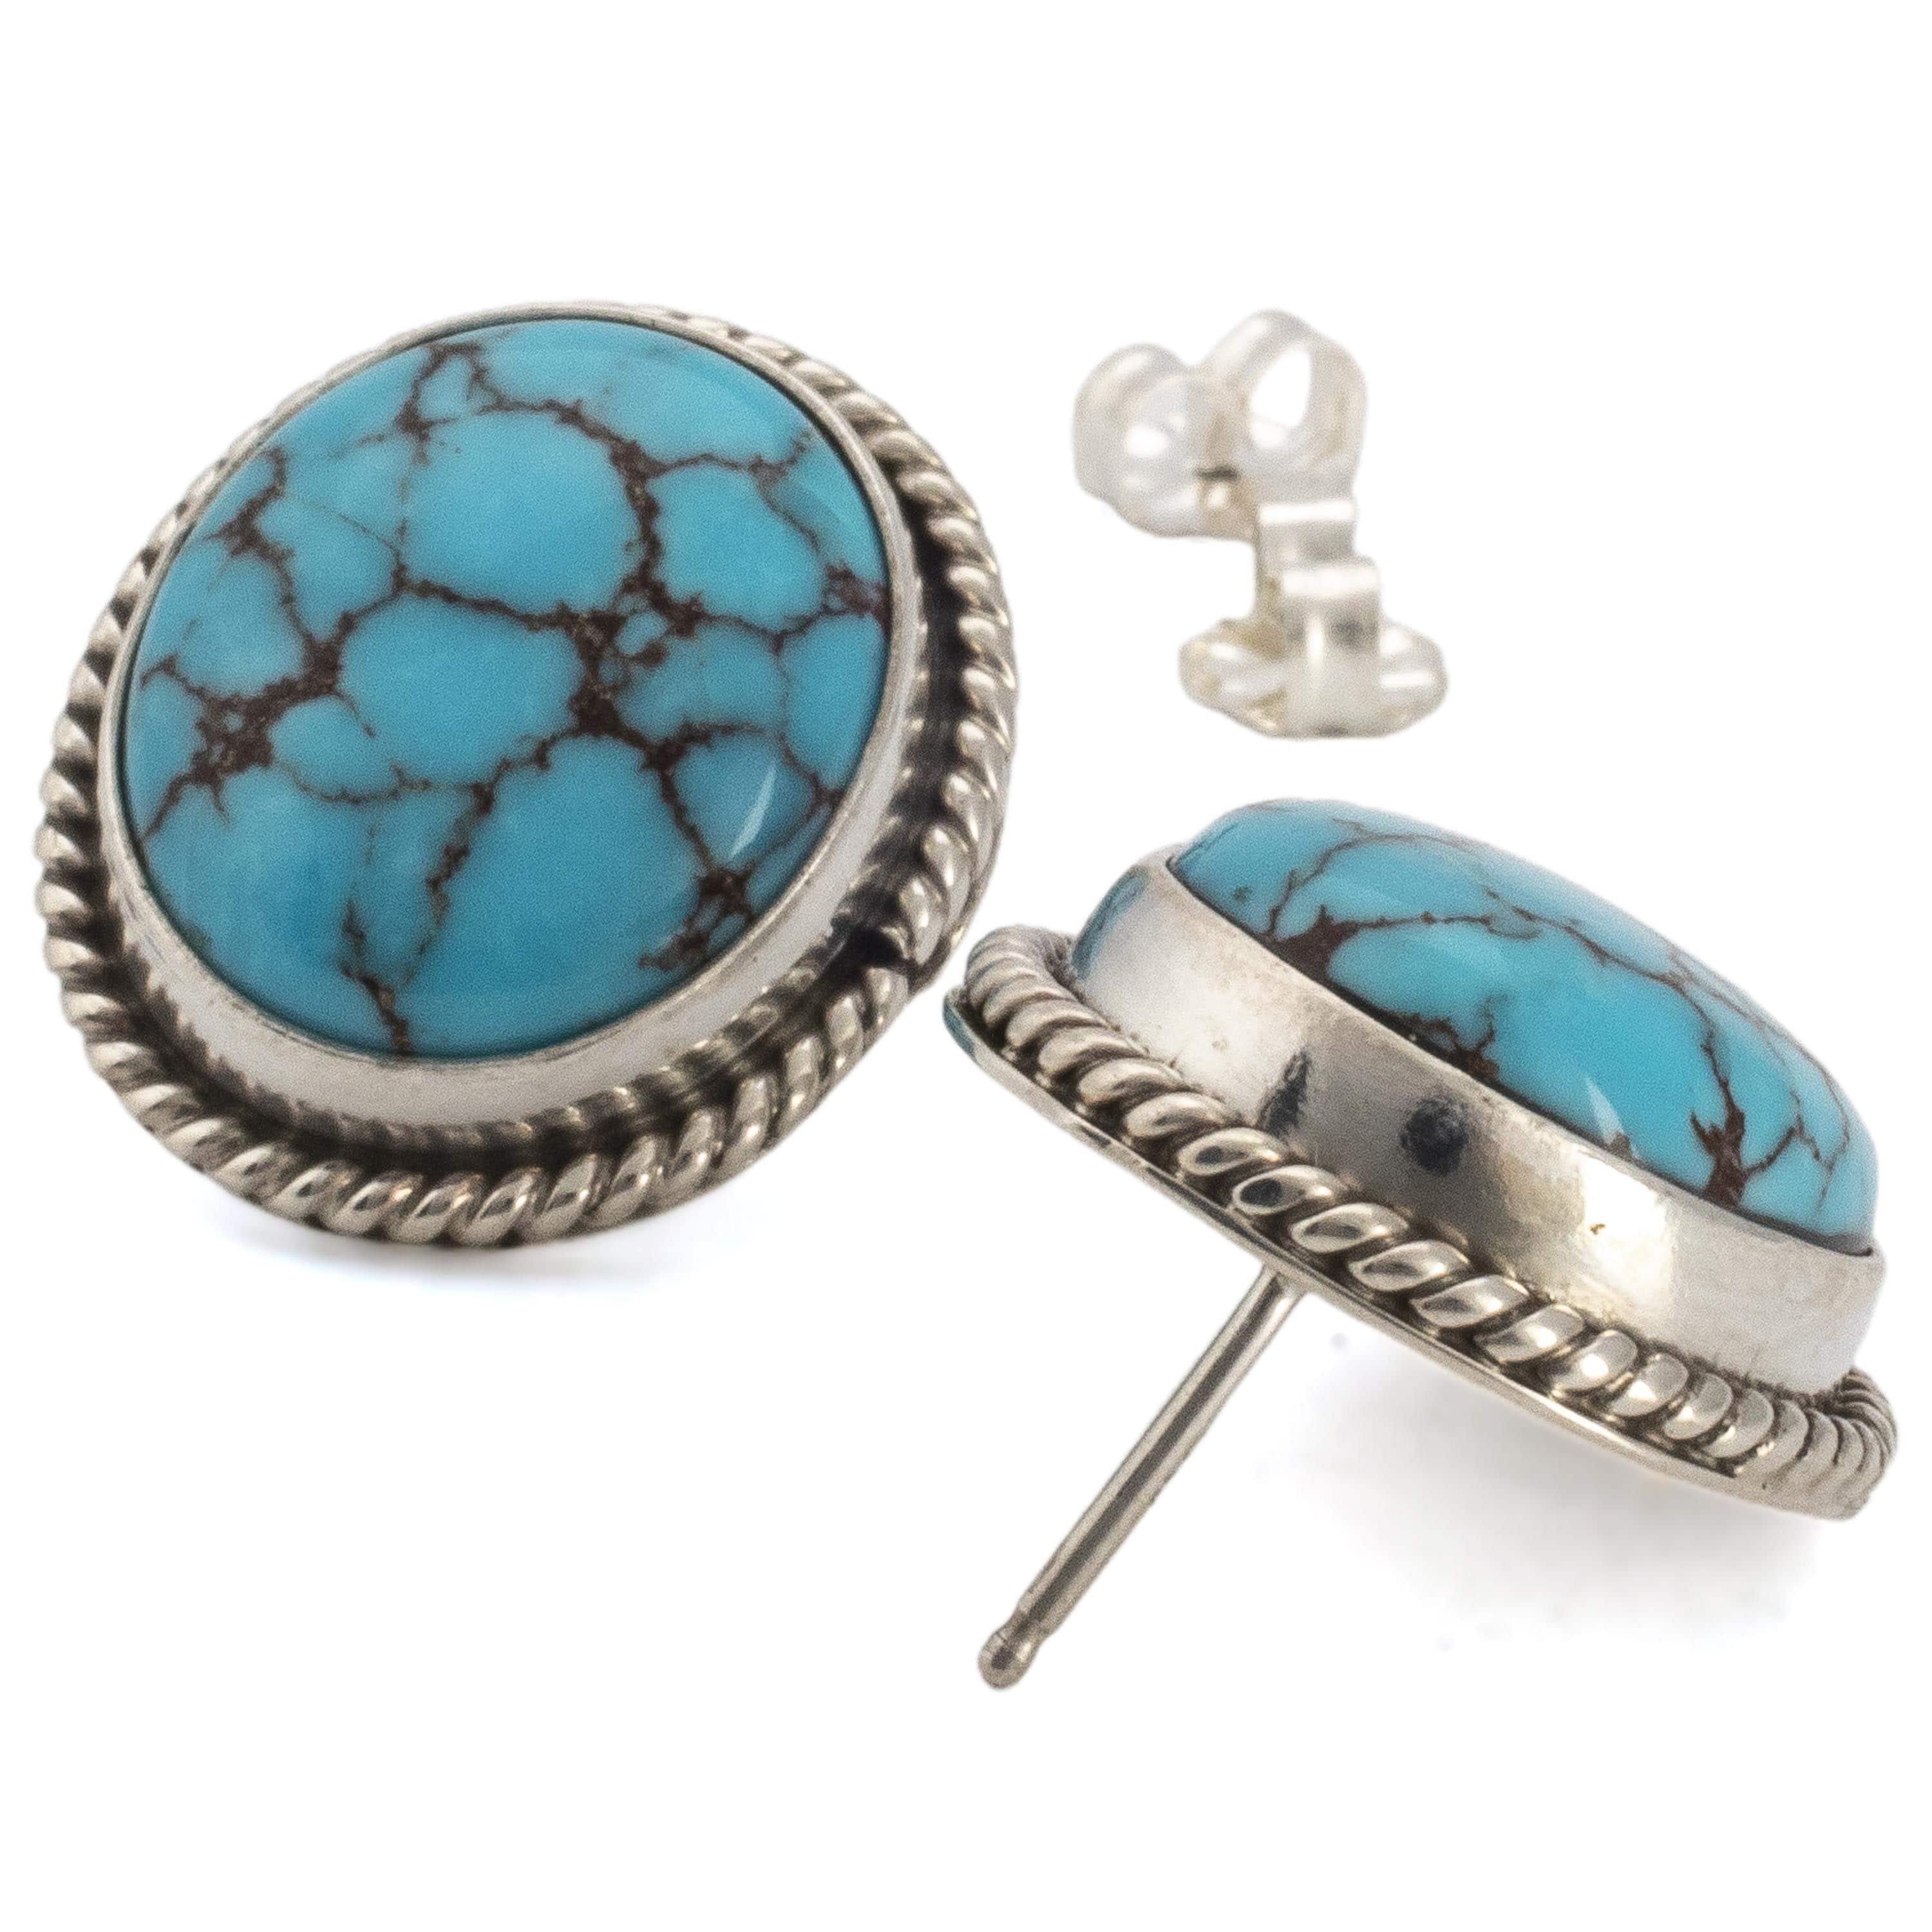 Kalifano Native American Jewelry Egyptian Turquoise Oval USA Native American Made Sterling Silver Earrings NAE800.005